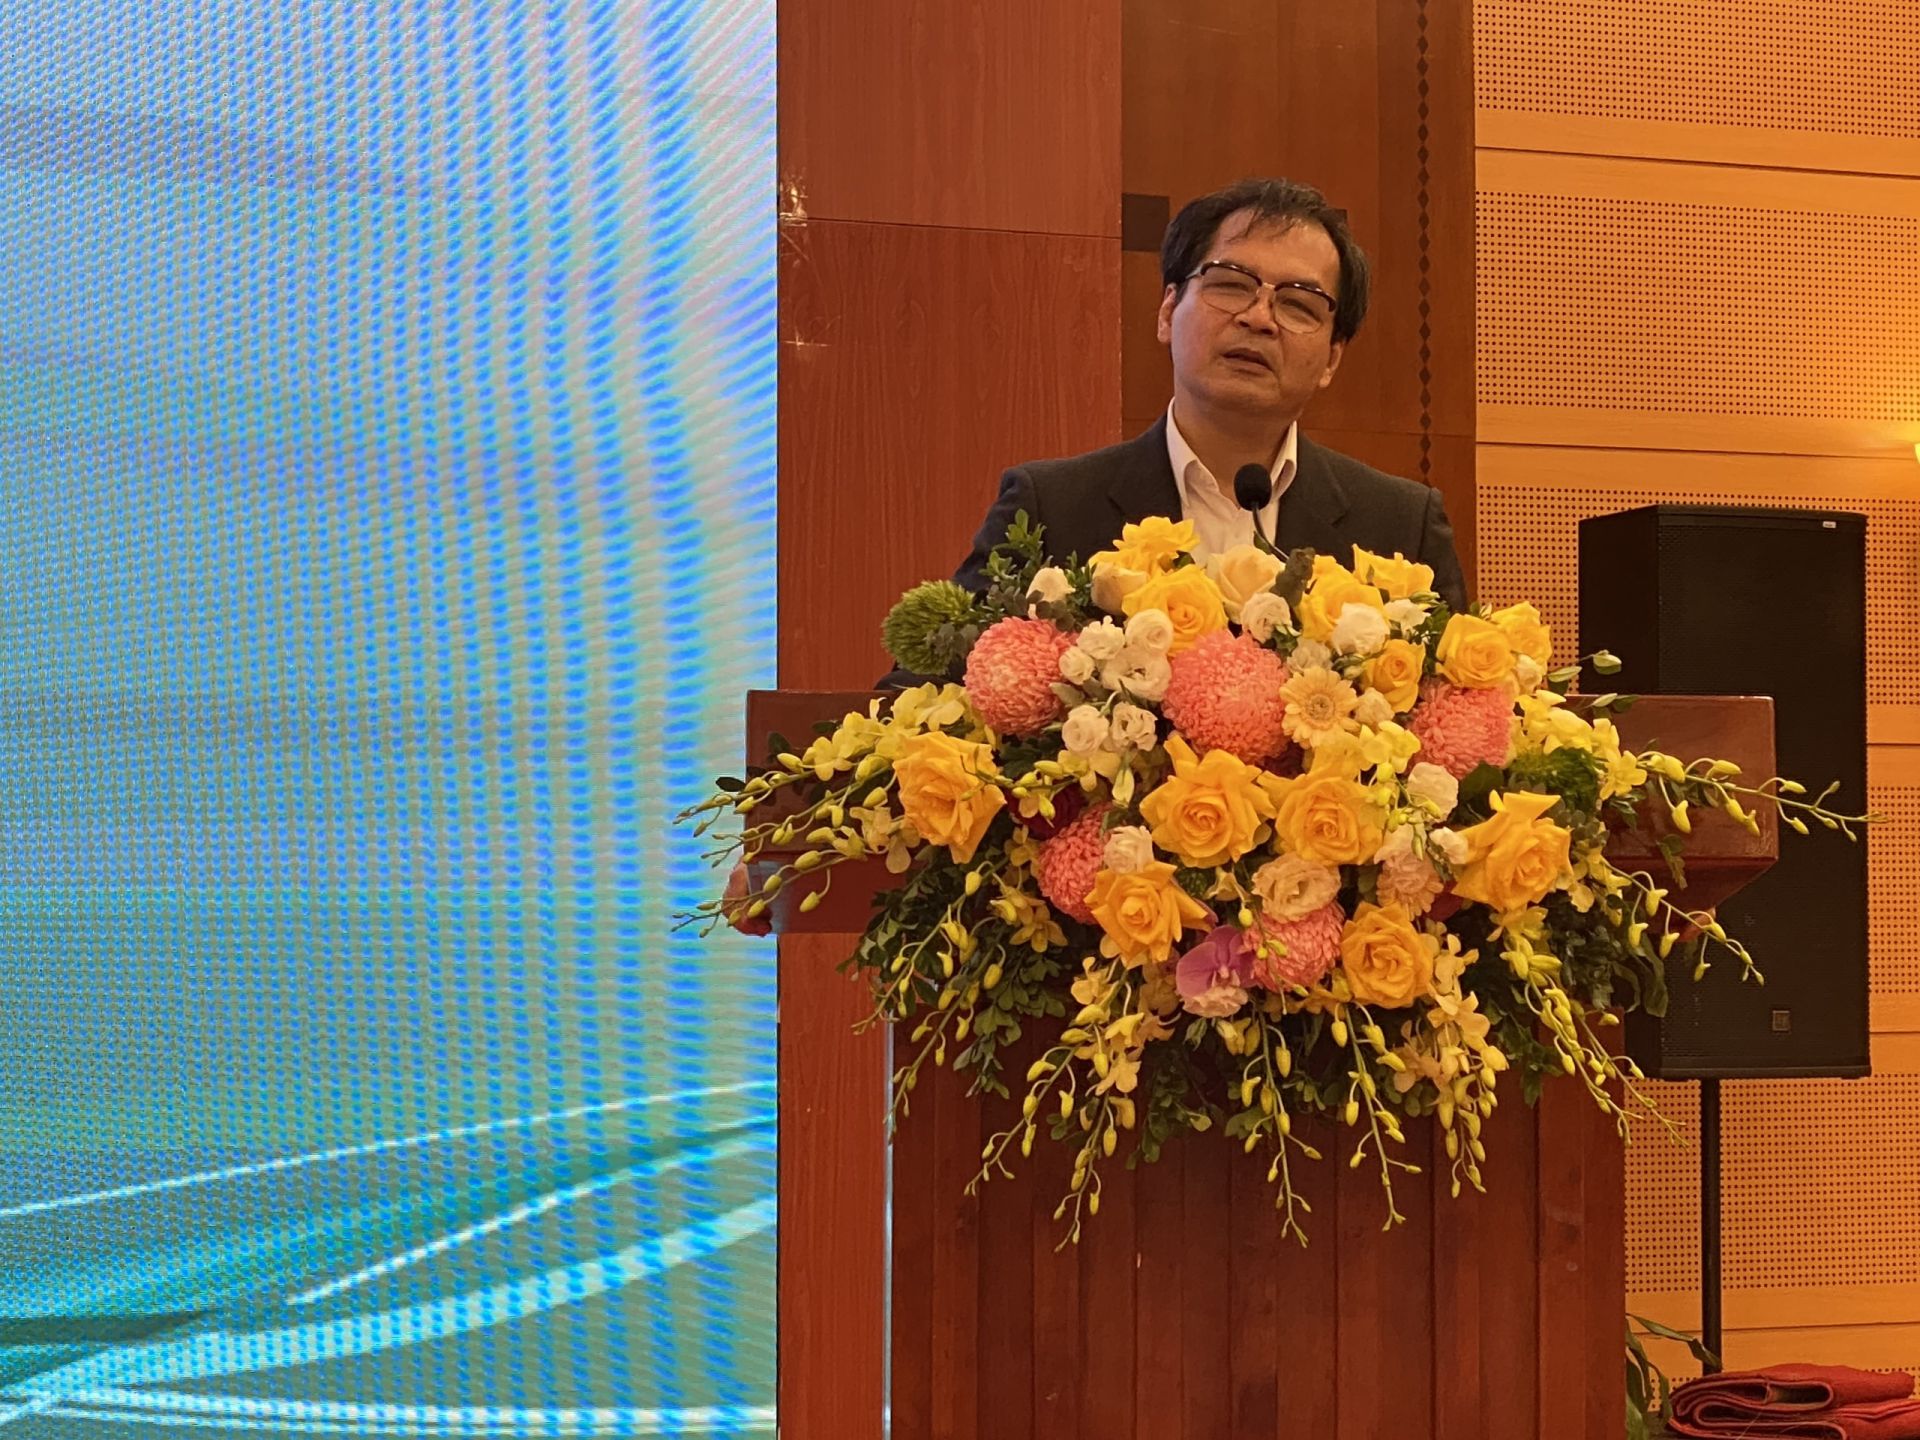 Dr To Hoai Nam - Standing Vice President and General Secretary of VINASME delivered the opening speech